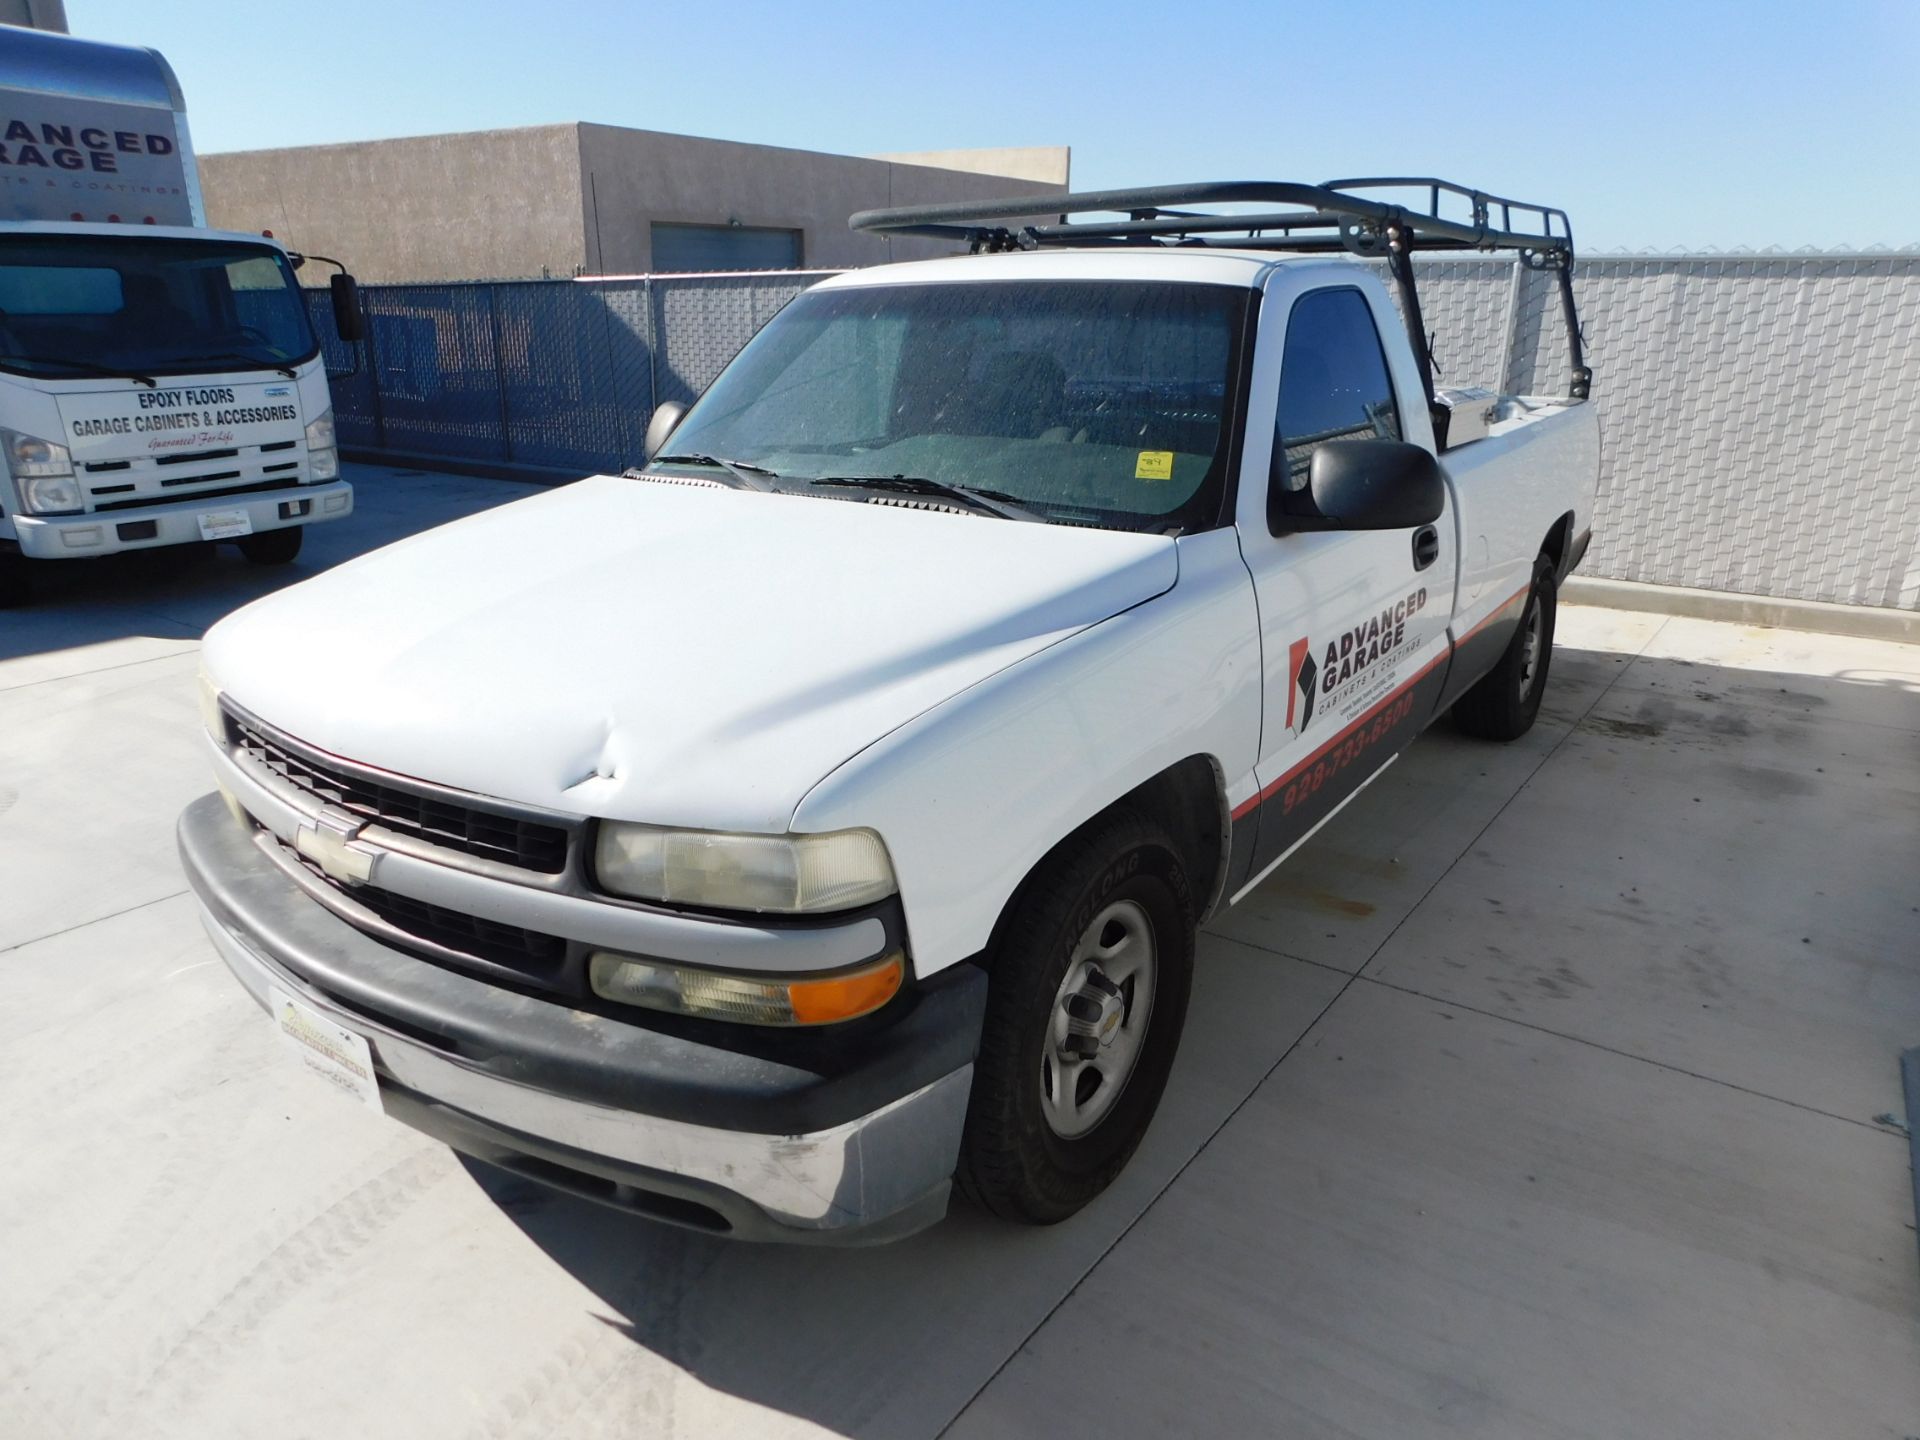 Silverado Pickup with Tool Rack and Tool Box, 88,834 Miles Showing, VIN 1GCEC14T91E251093, - Image 7 of 7